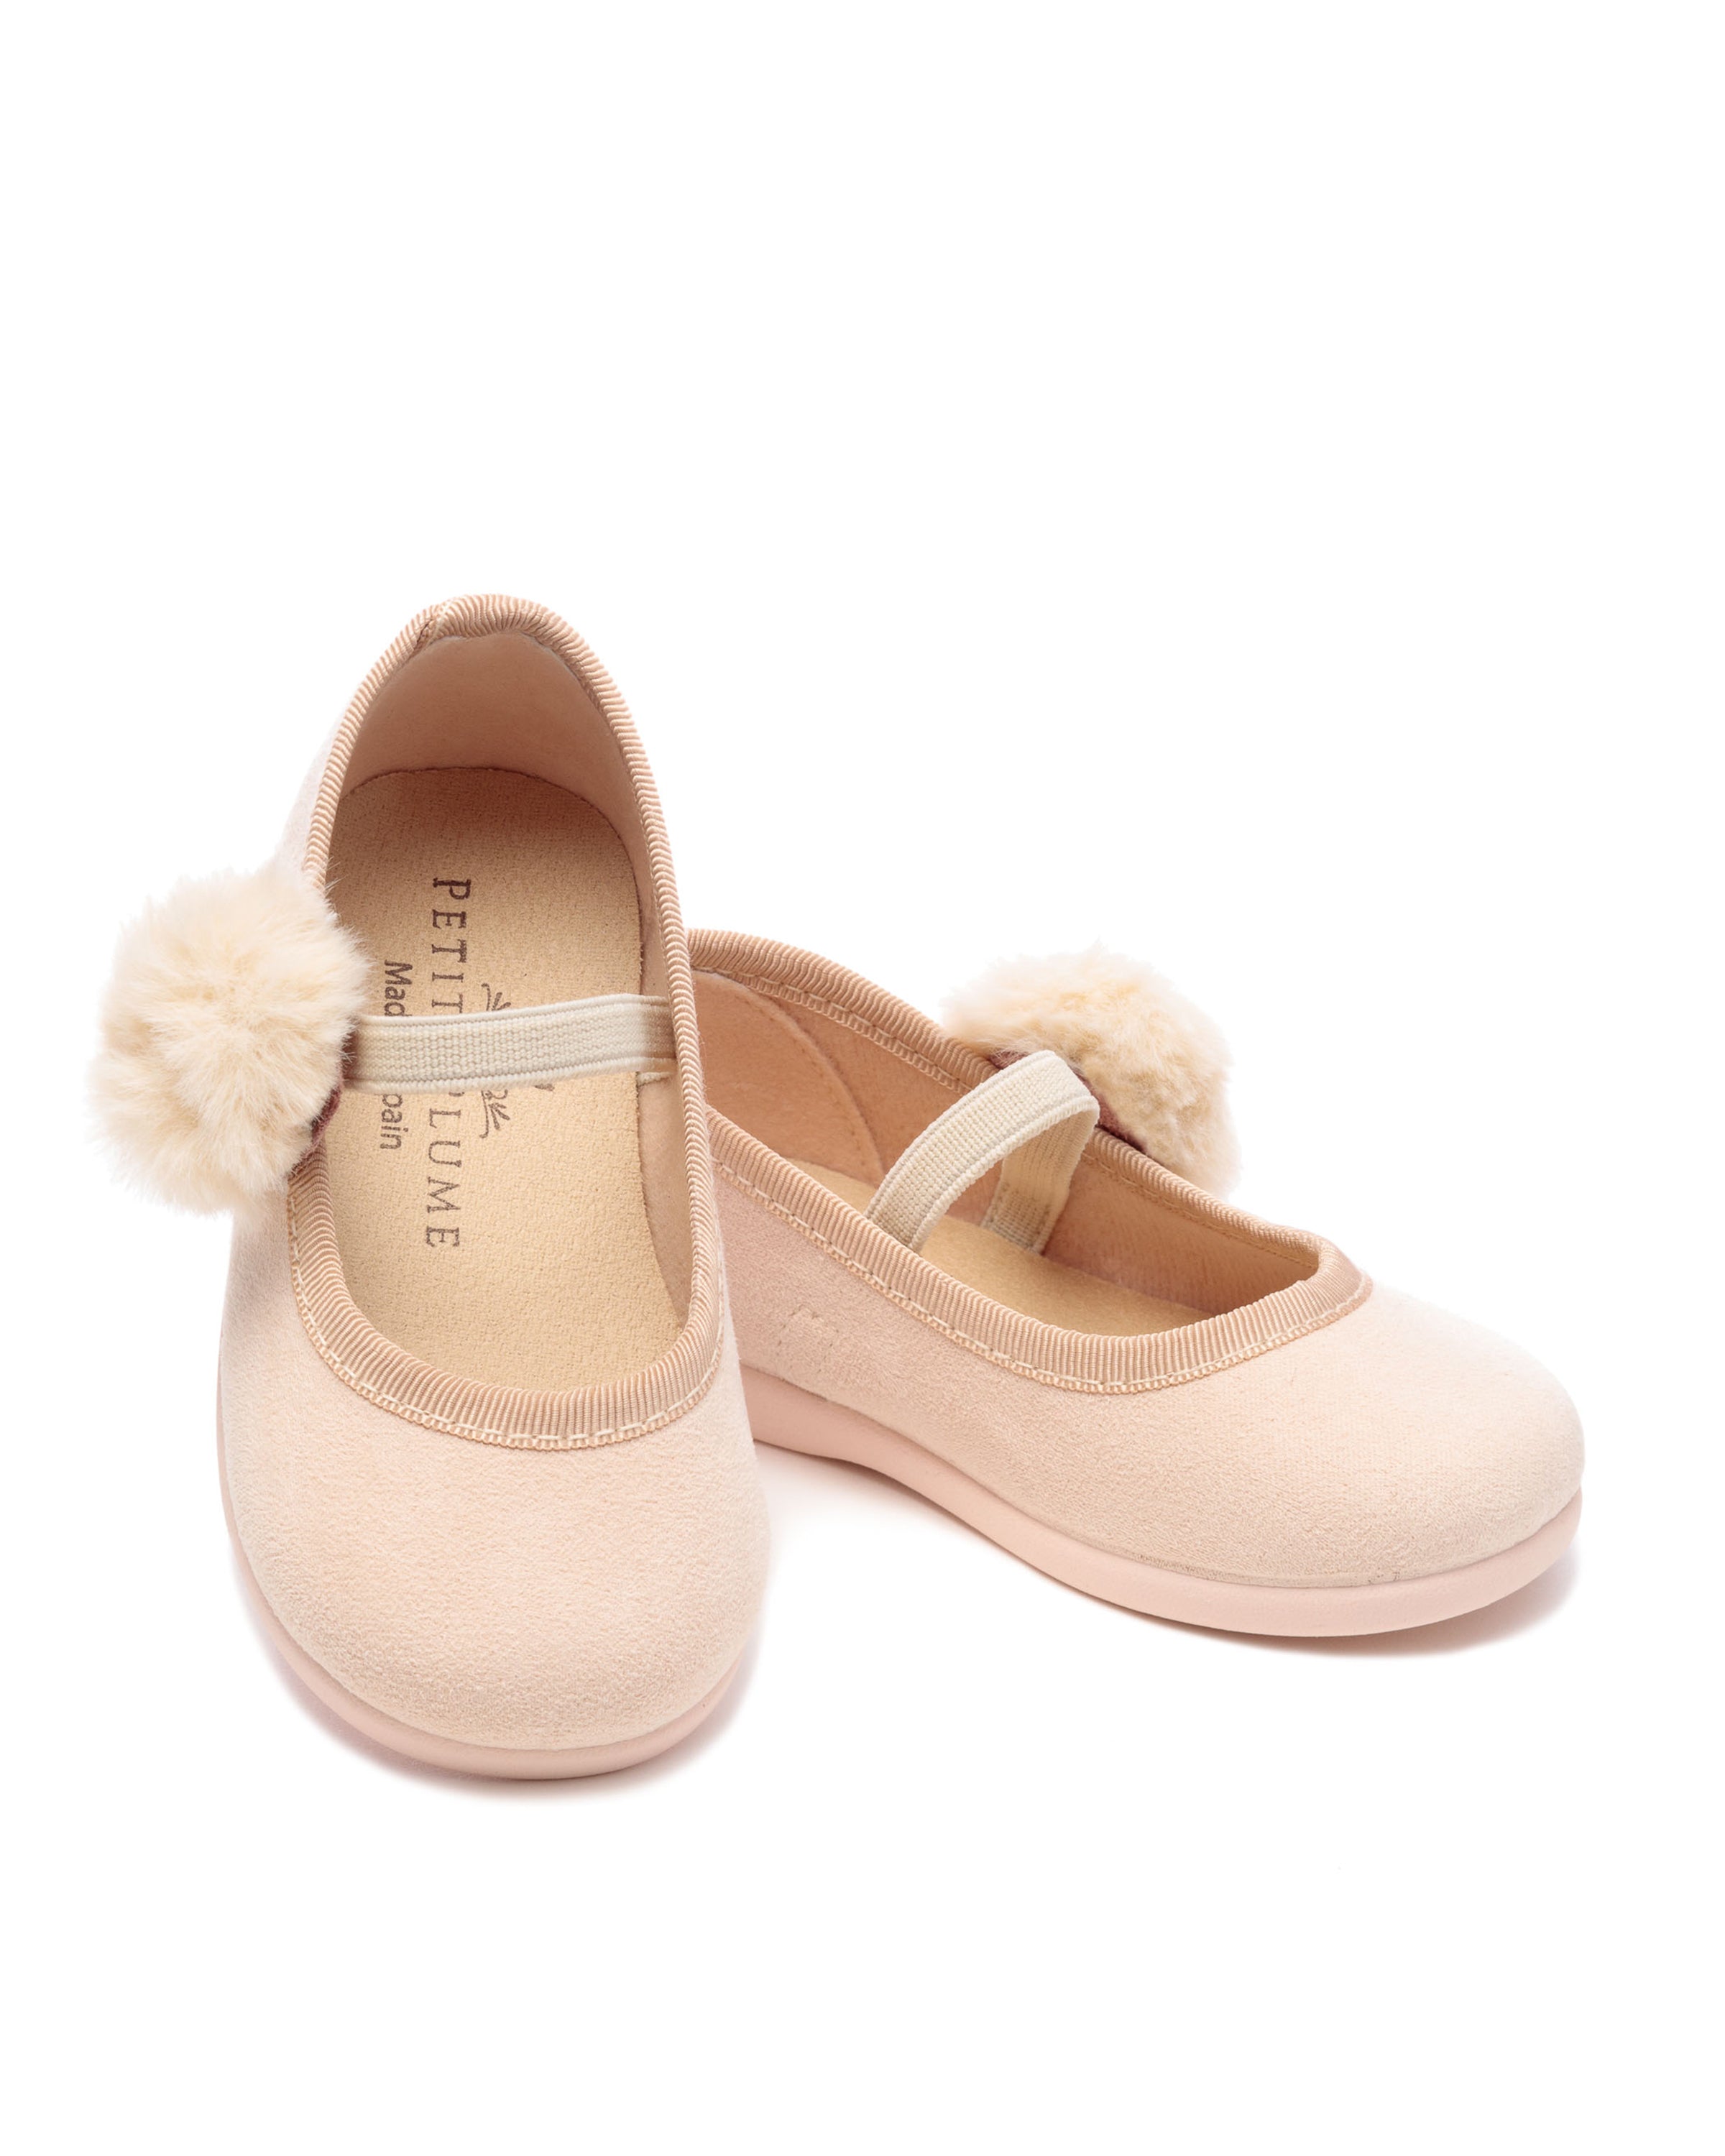 Kid's Delphine Slipper in Peach Suede with a Festive Pom